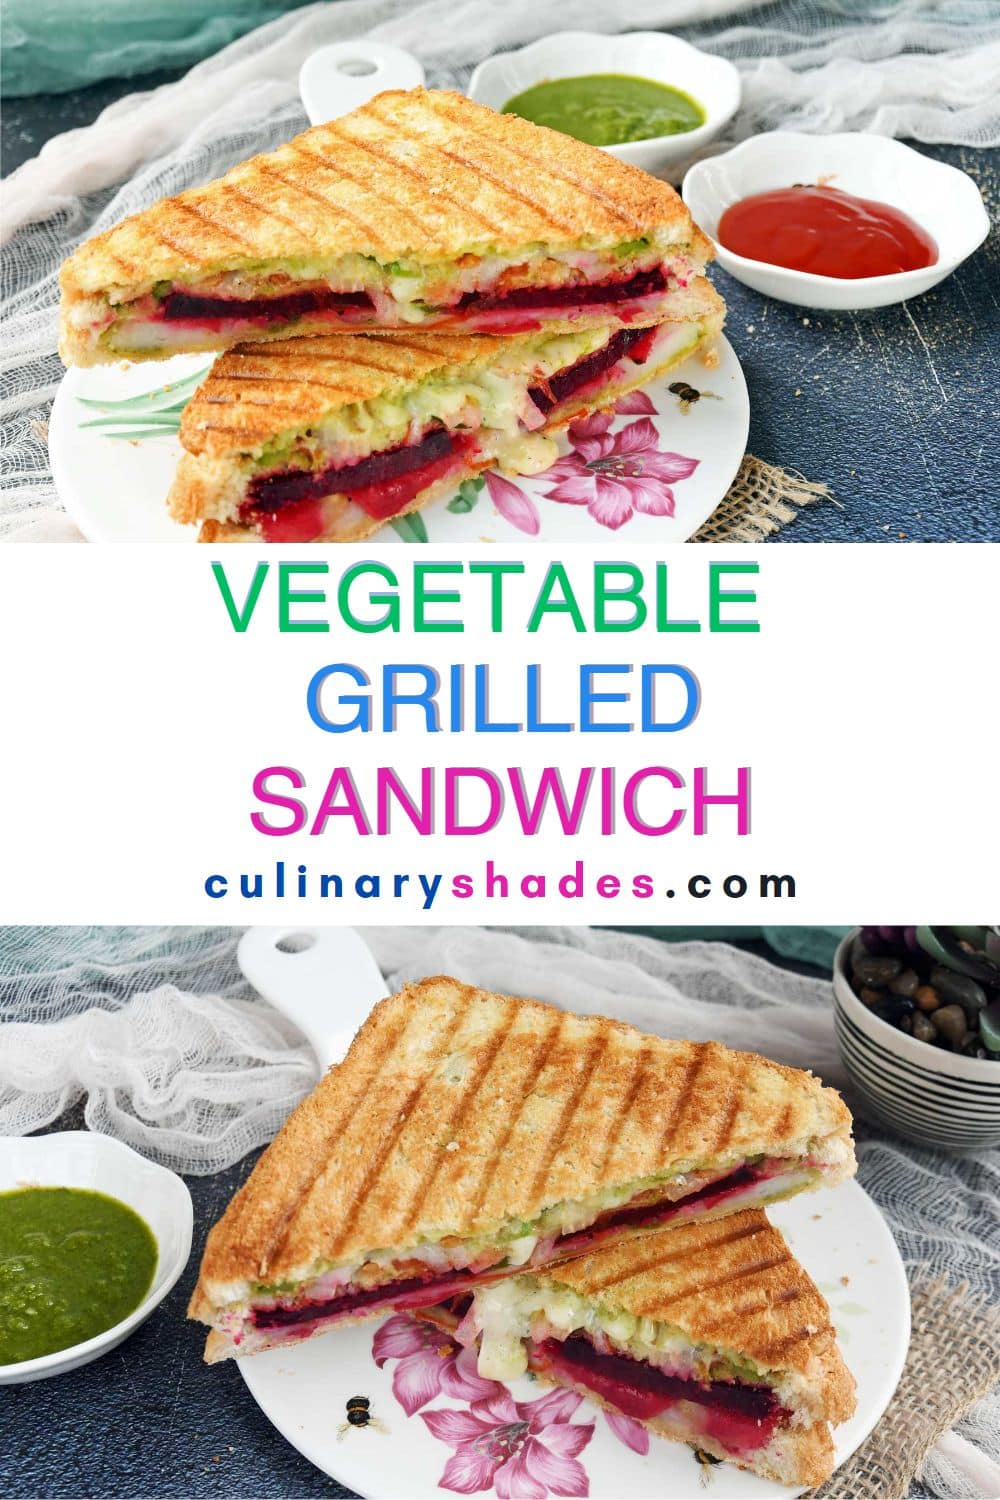 Vegetable grilled sandwich pin.